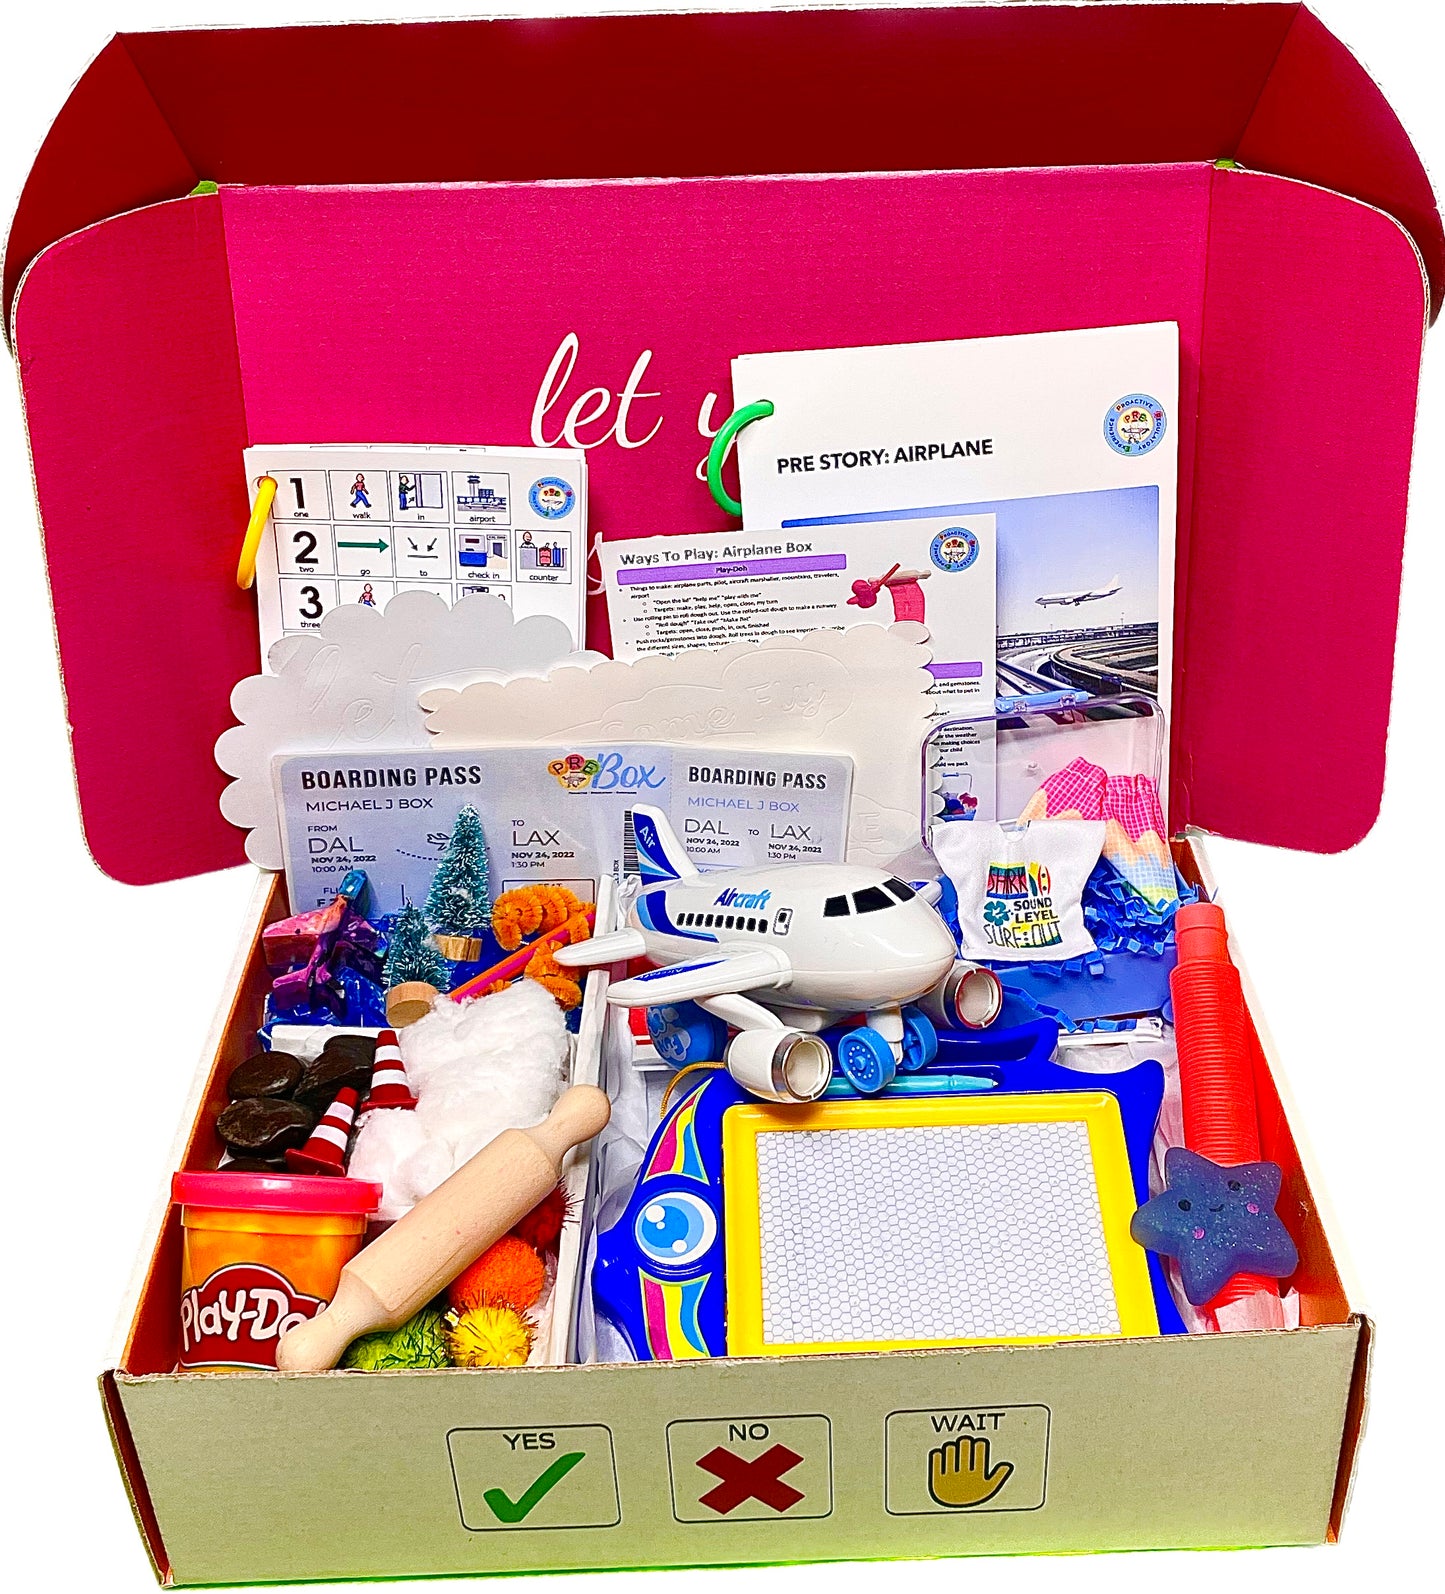 Airplane Sensory Box. Included is an airplane, Play-Doh, rolling pin, magna doodle, runway, suitcase, pop tube, squishy, Airplane PRE Story, airport visual steps, and a Ways To Play parent handout. A sensory box to help kids prepare for traveling on an airplane.